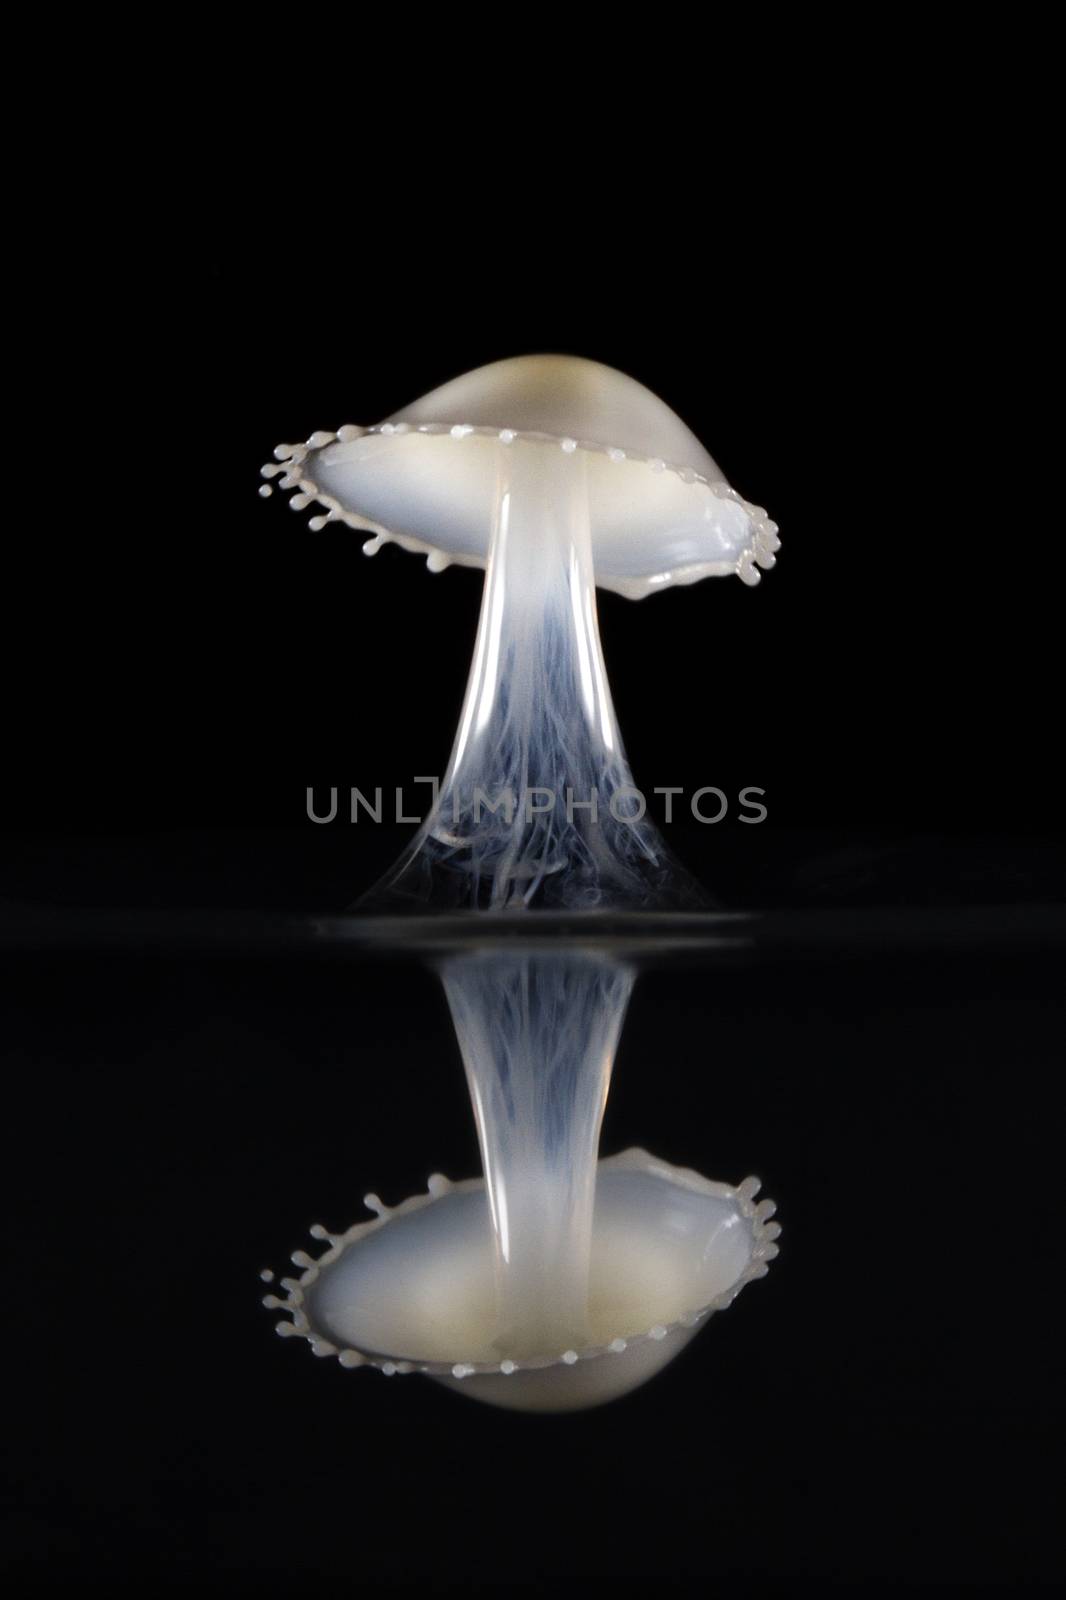 Milk is dropped into water and drops collide to form a mushroom shape with a reflection in the black water surface. Liquid drop art, water drop photography